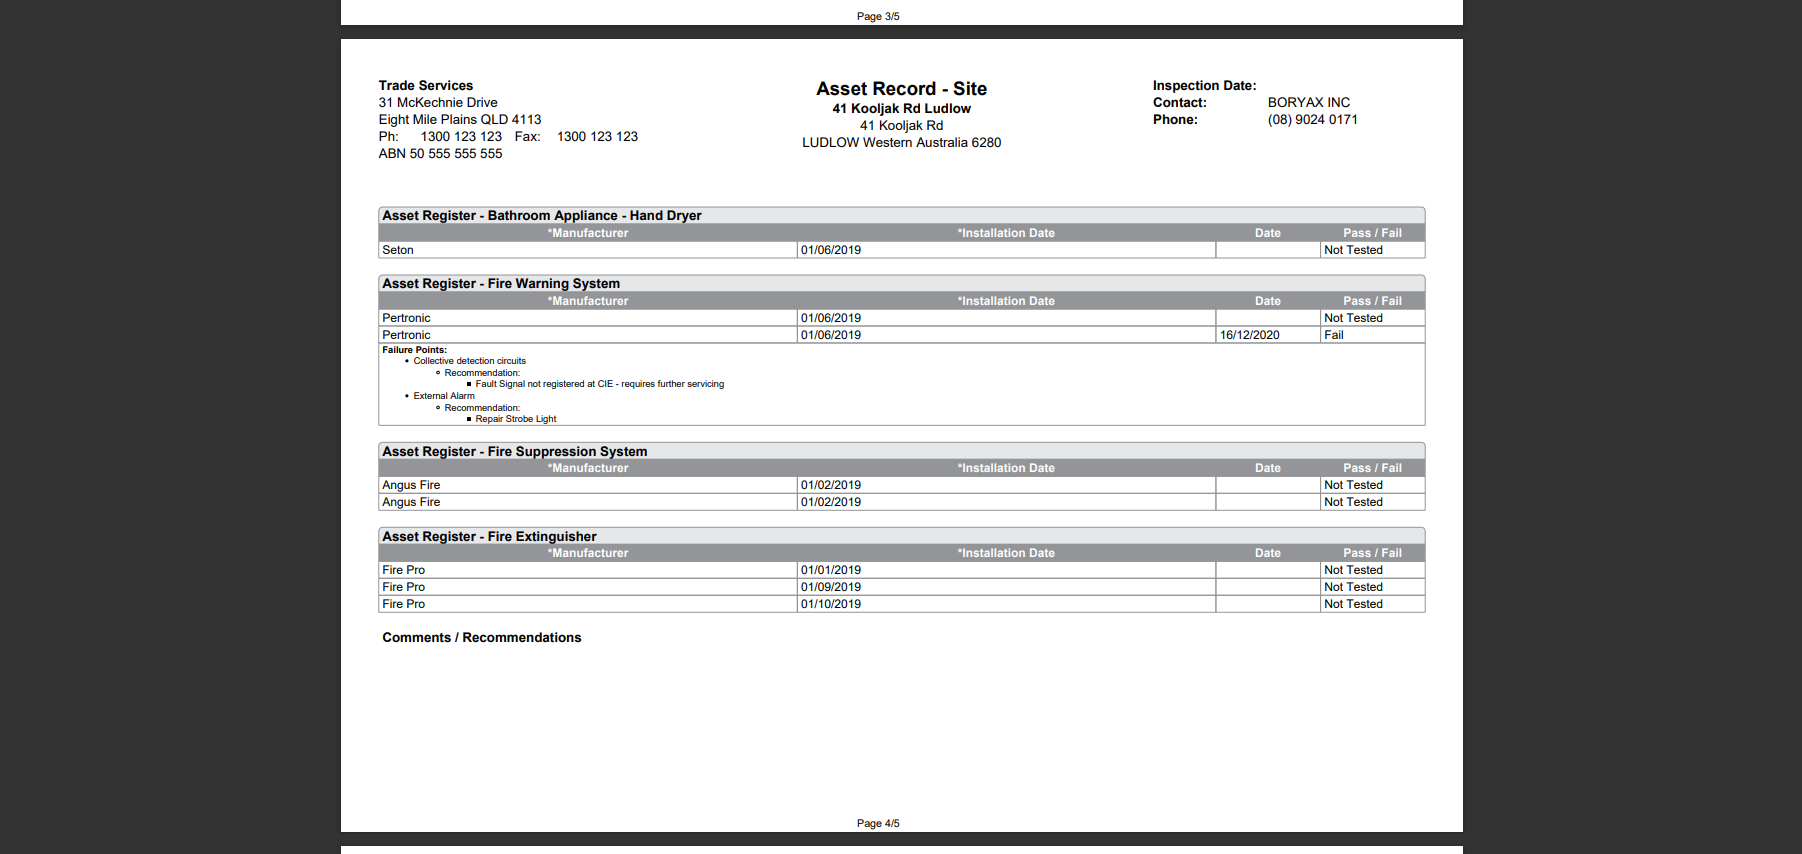 A screenshot of the Asset Record - Site form.